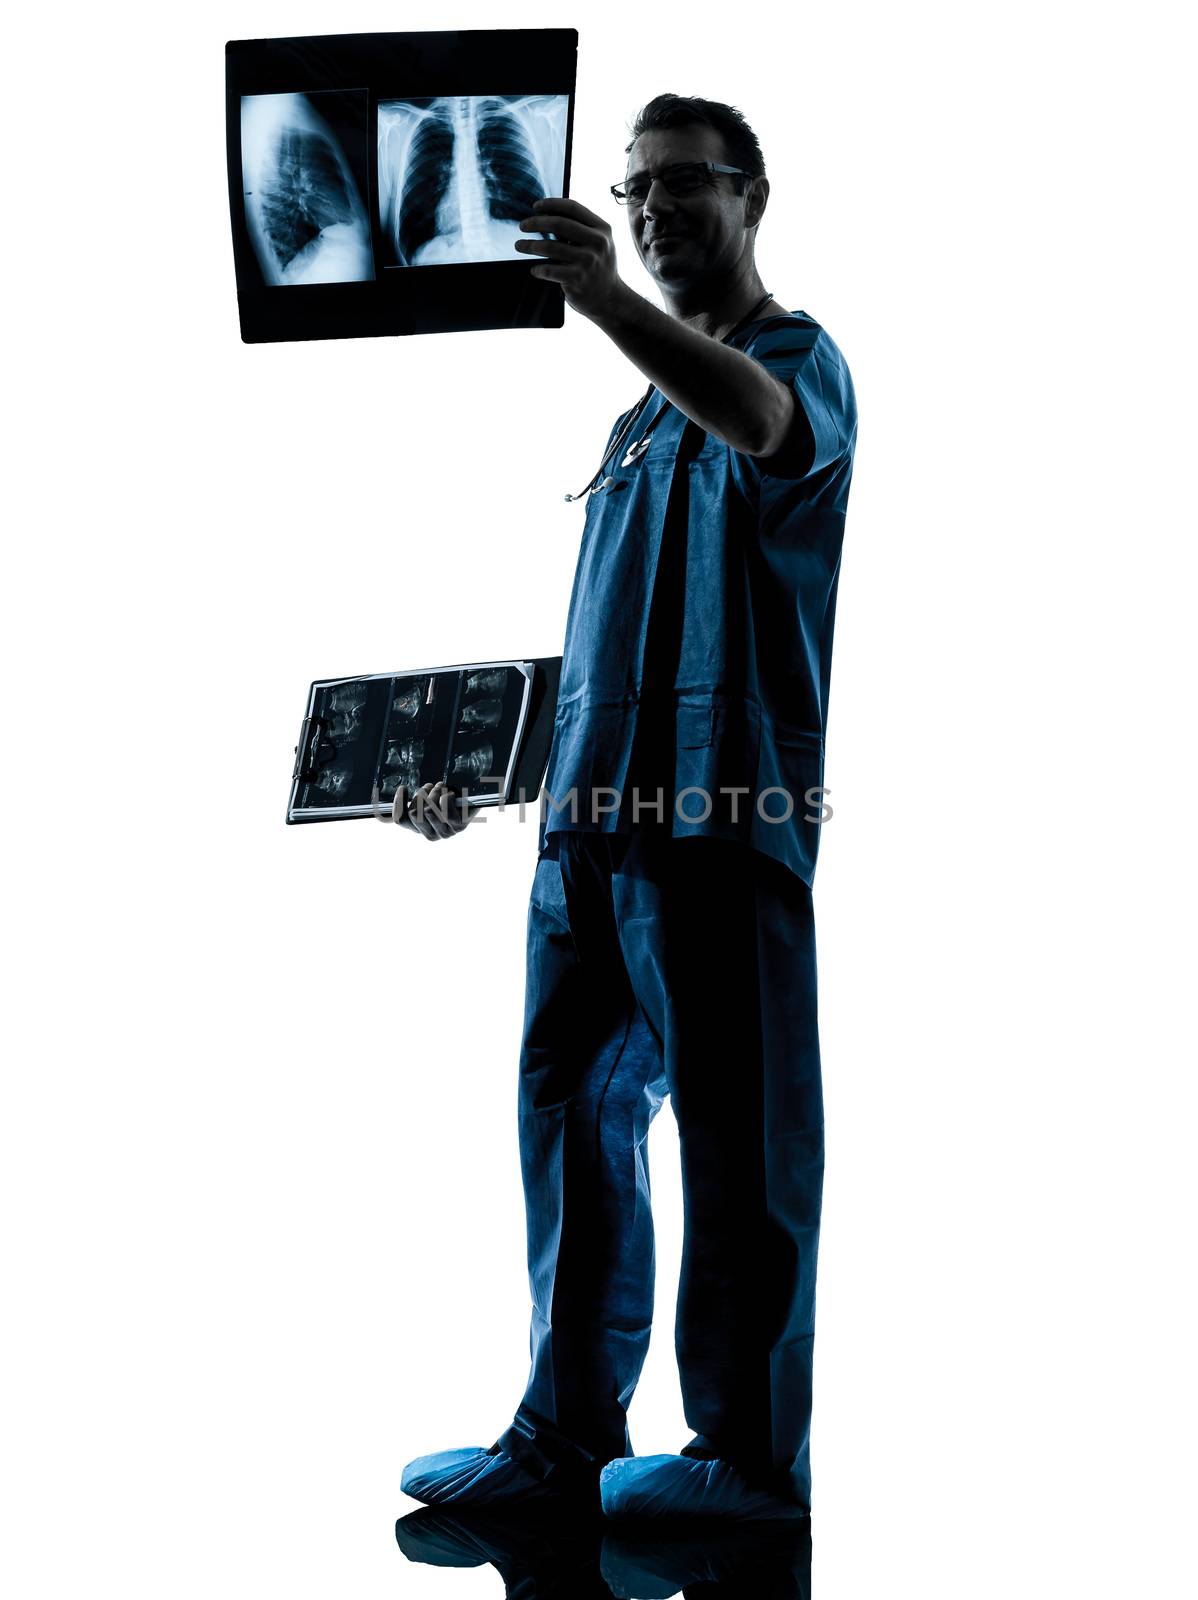 doctor surgeon radiologist examining lung torso  x-ray image by PIXSTILL